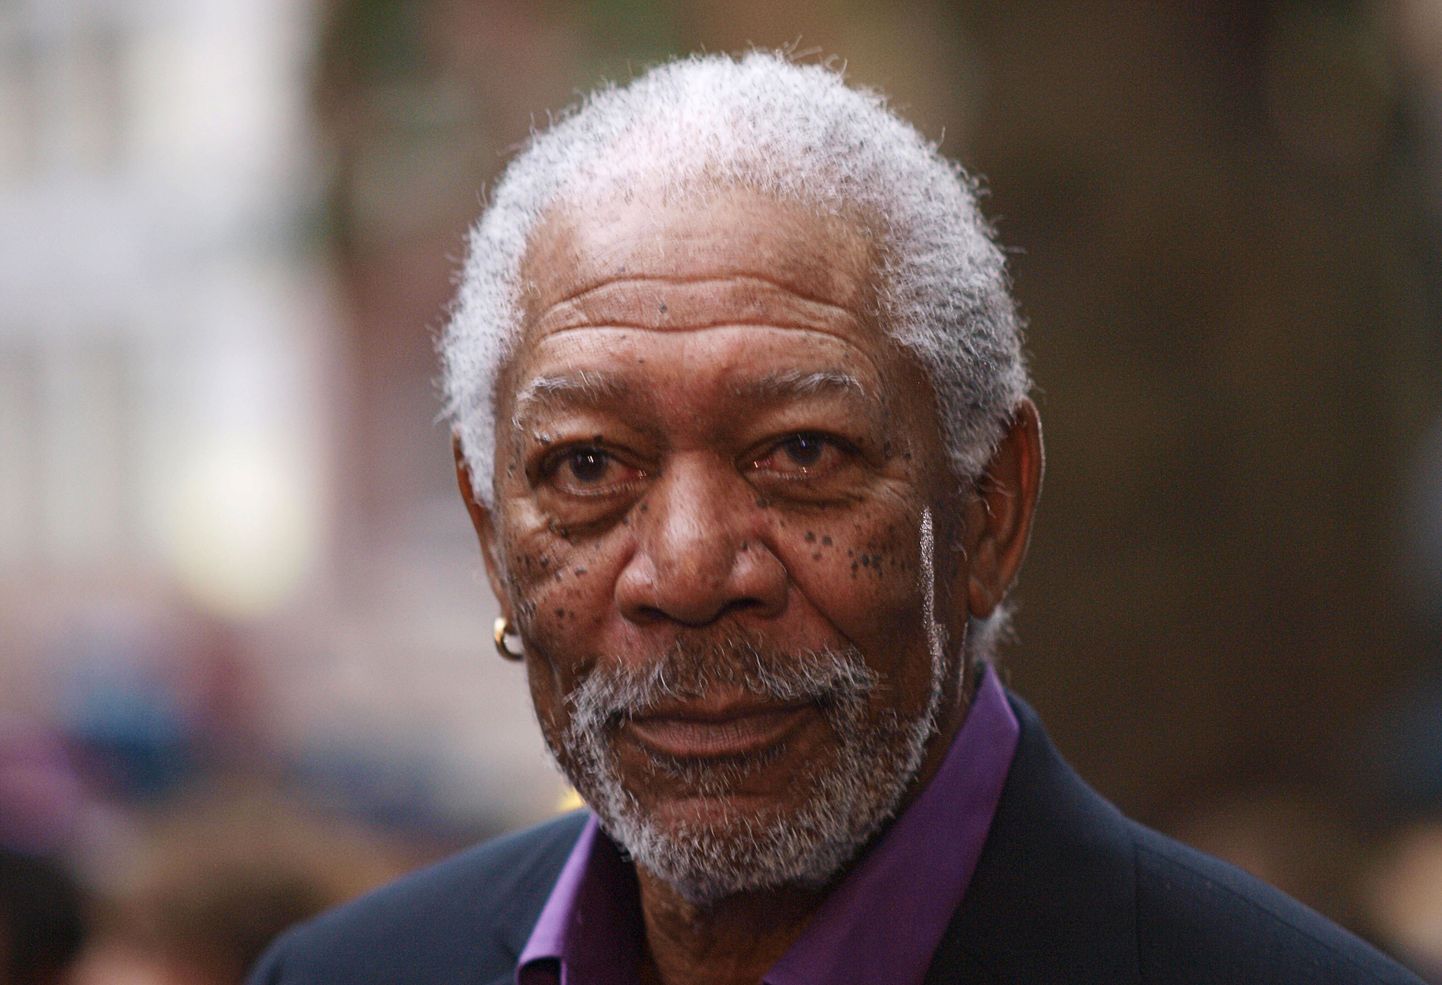 US actor Morgan Freeman arrives for the European premiere of his latest film 'The Dark Knight Rises' in London's Leicester Square on July 18, 2012. AFP PHOTO/Max Nash